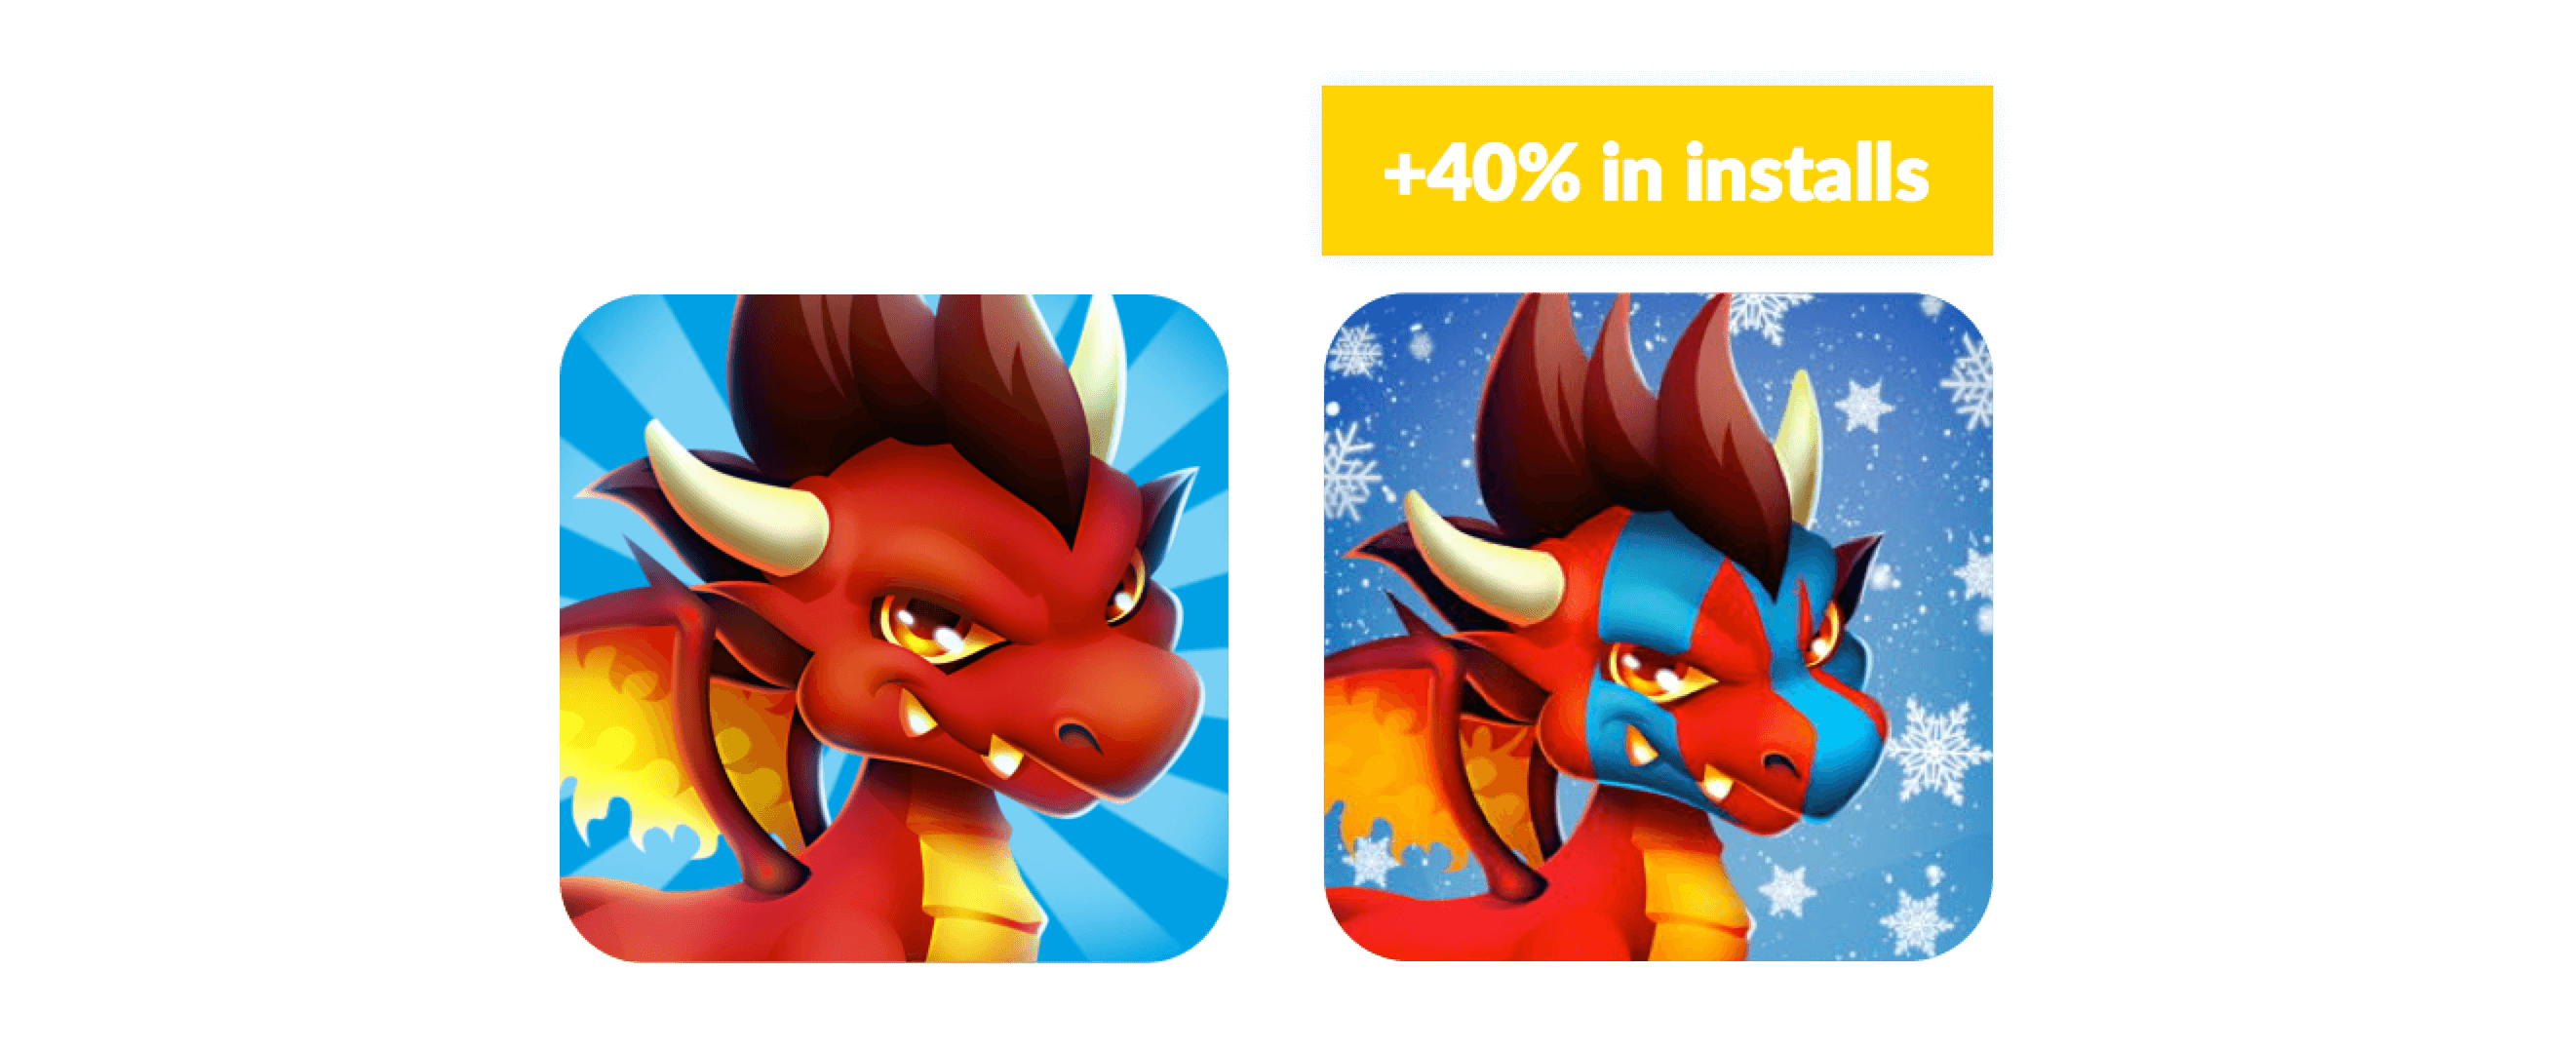 A comparison between two icons with a dragon game character. One regular, one Christmas themed. Conversion uplift noted: +40%.